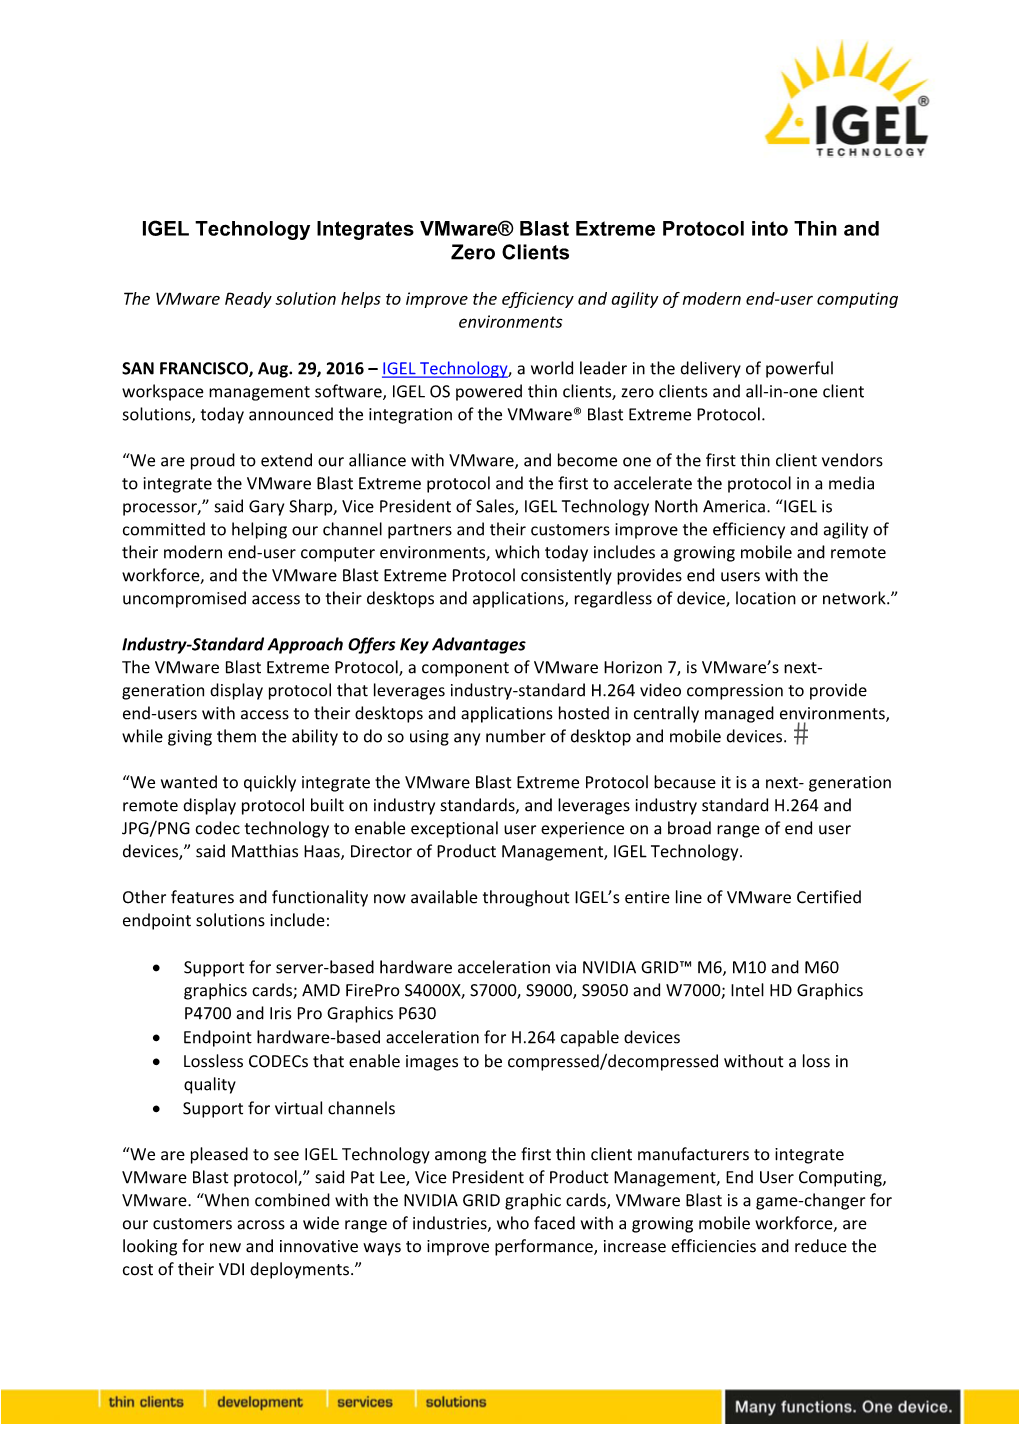 IGEL Technology Integrates Vmware® Blast Extreme Protocol Into Thin and Zero Clients